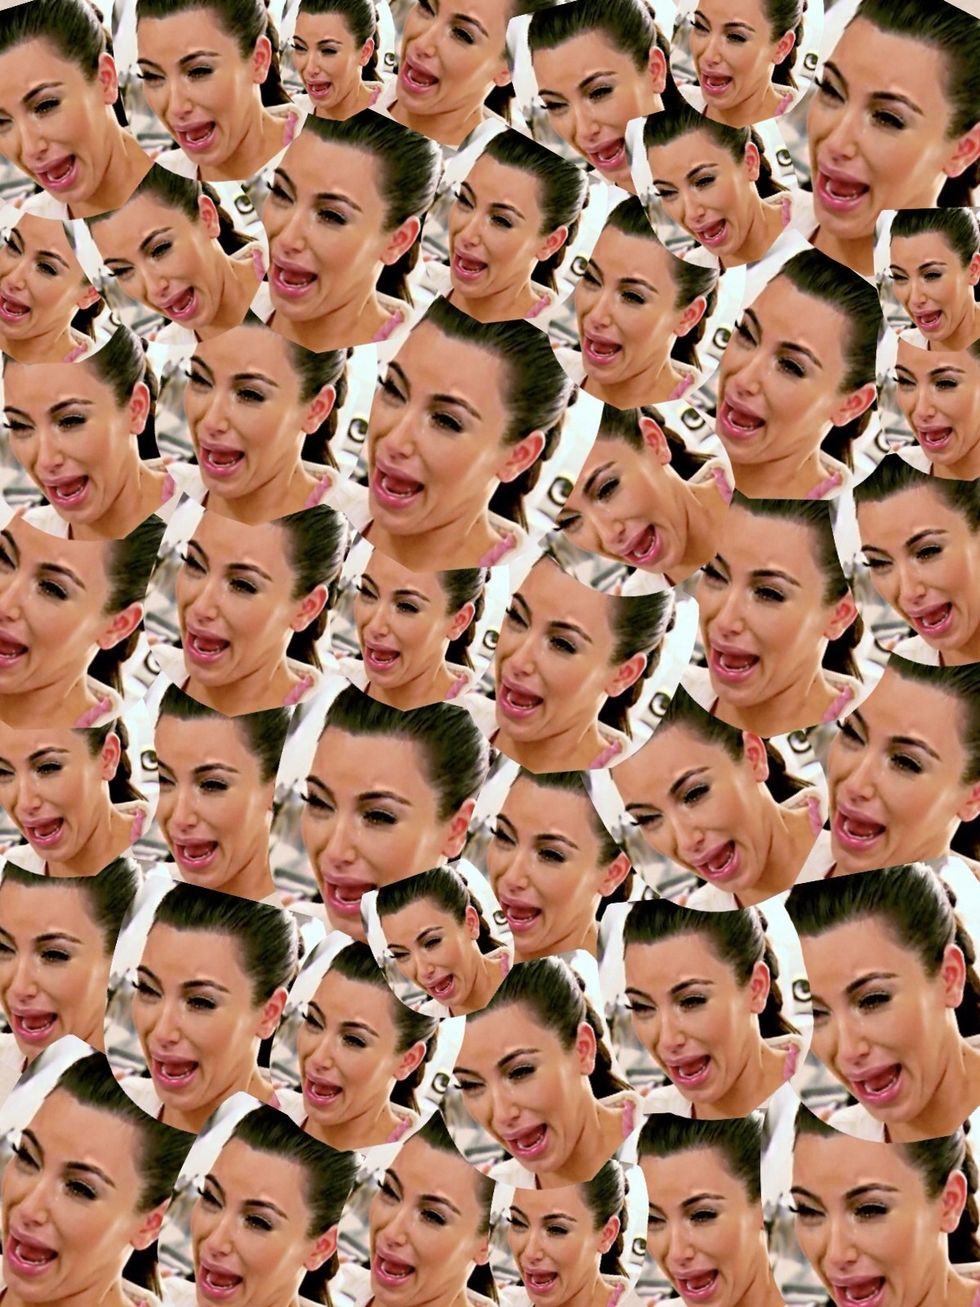 Finals Week As Told By Kim Kardashian's Crying Face